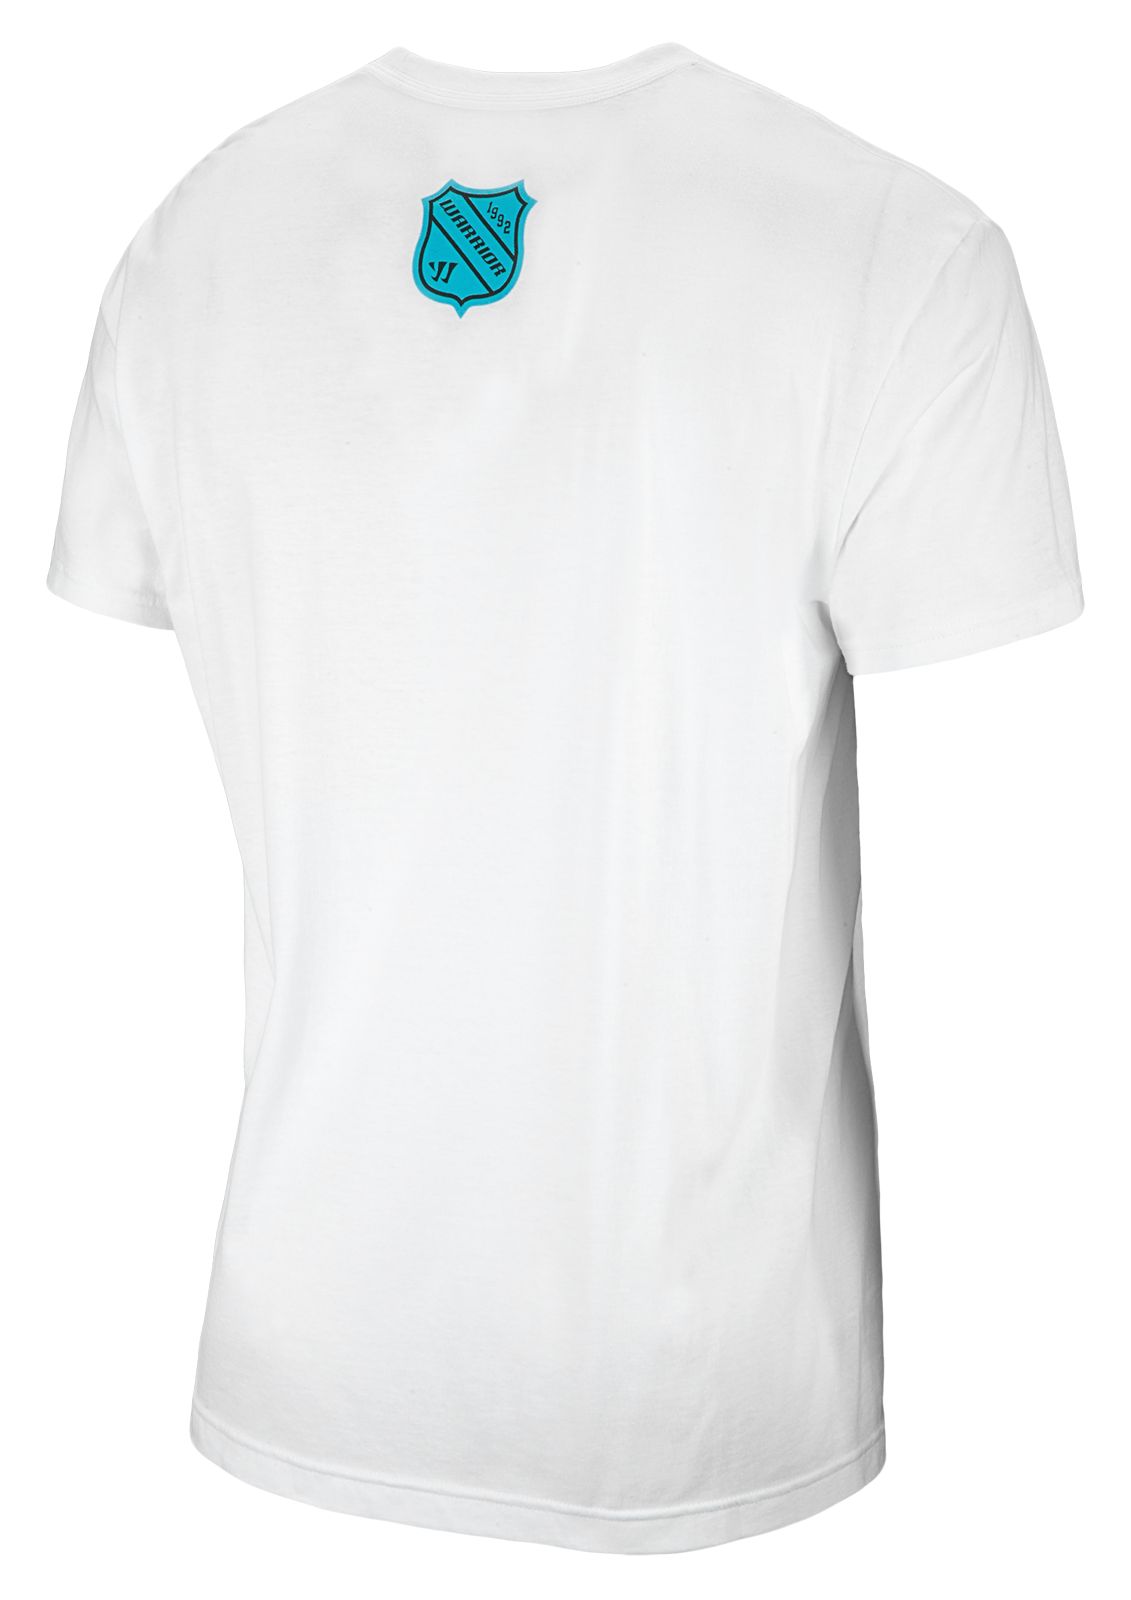 Frontier 50/50 Tee, White image number 0